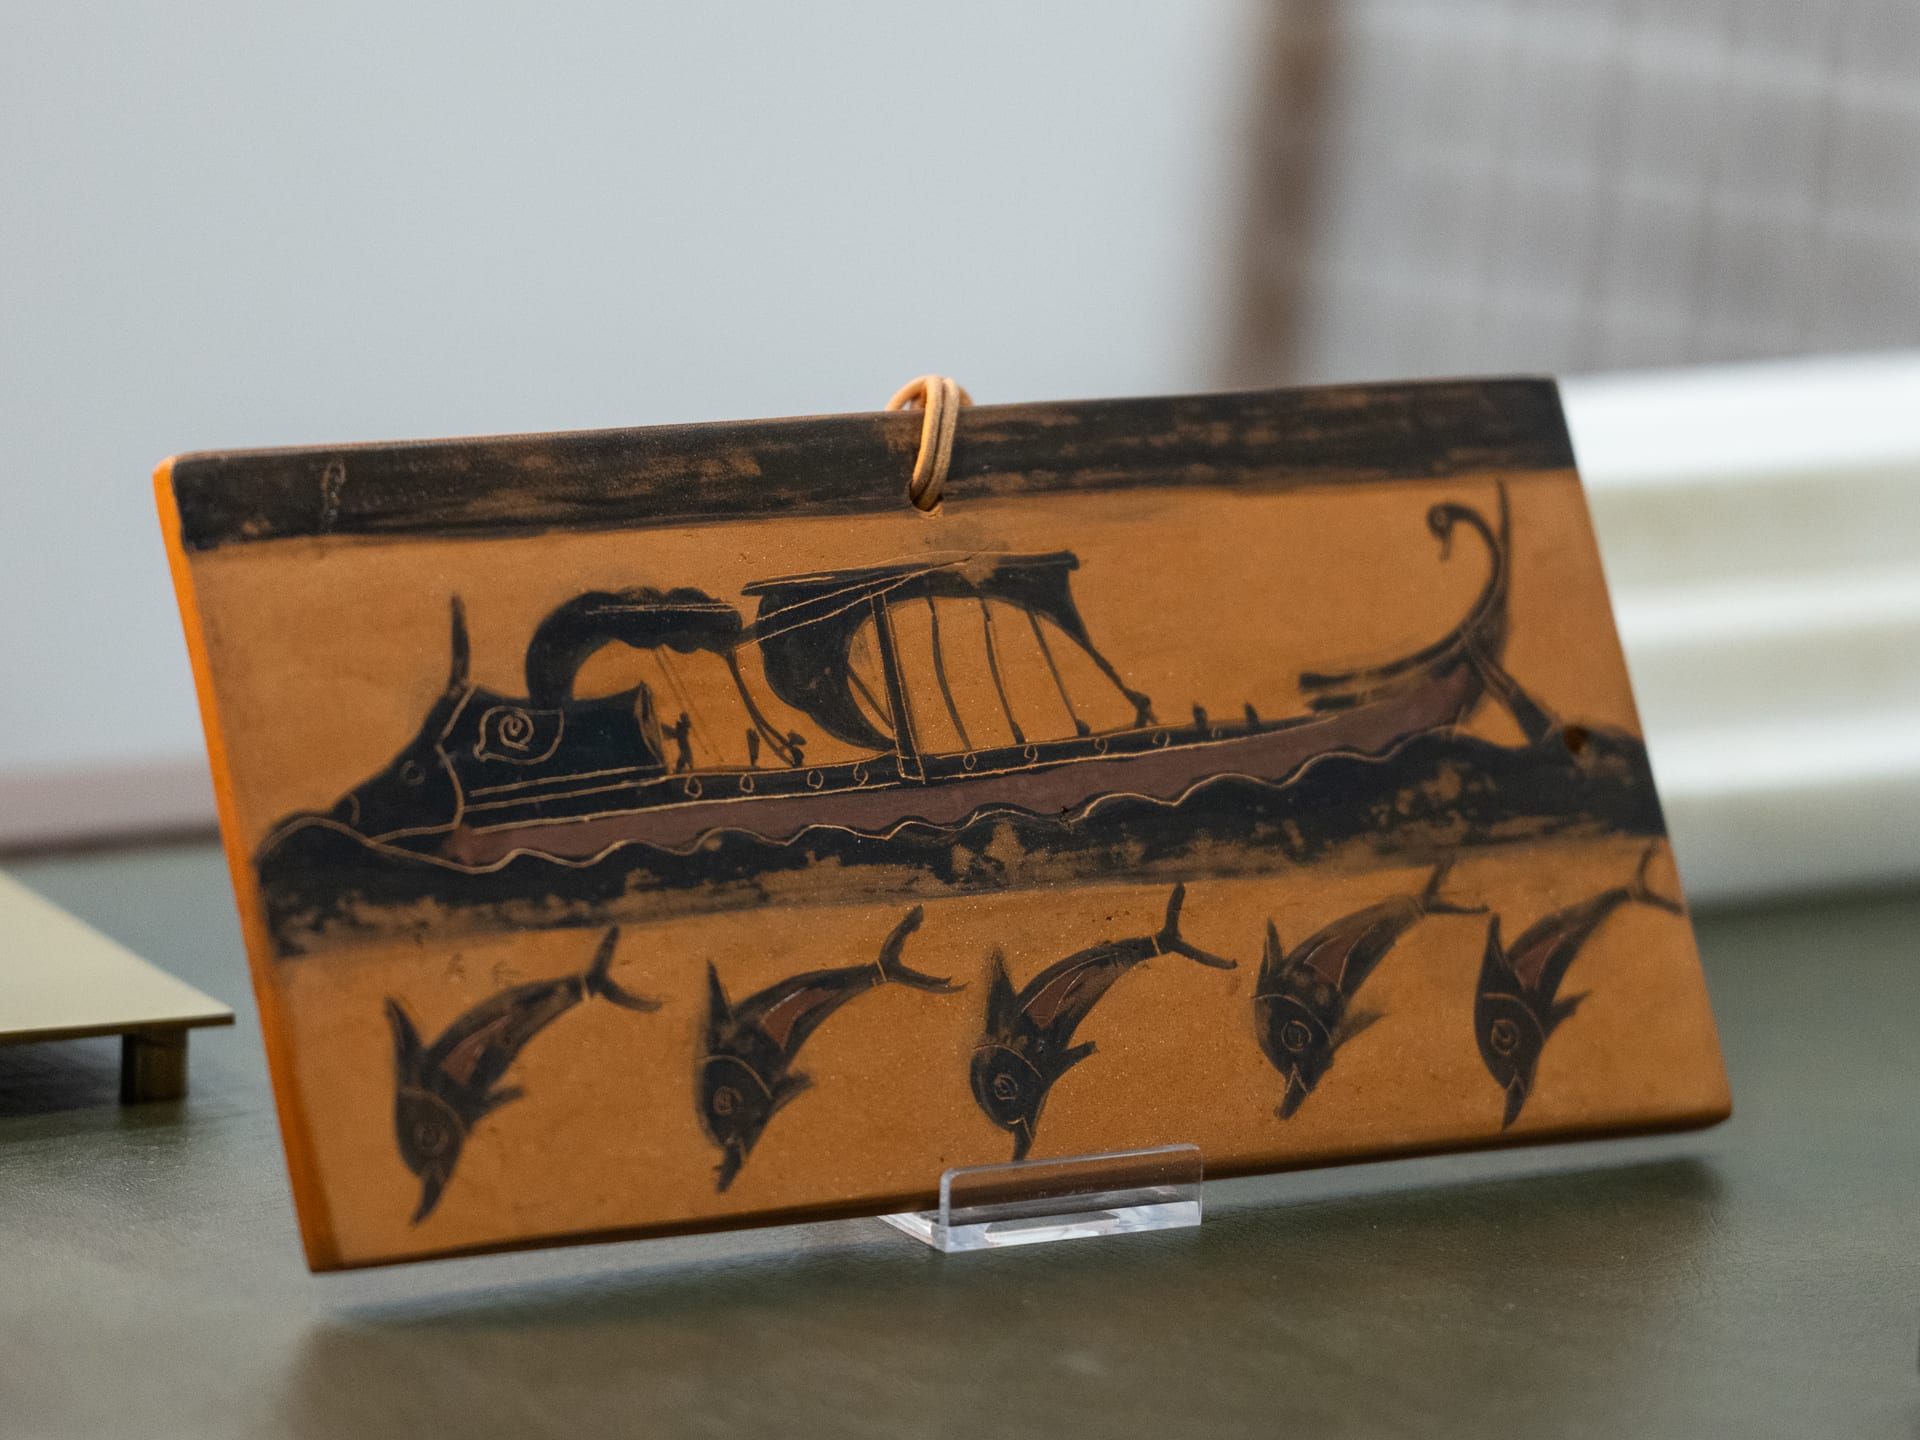 Ceramic Tile with a Depiction of a Ship and Dolphins